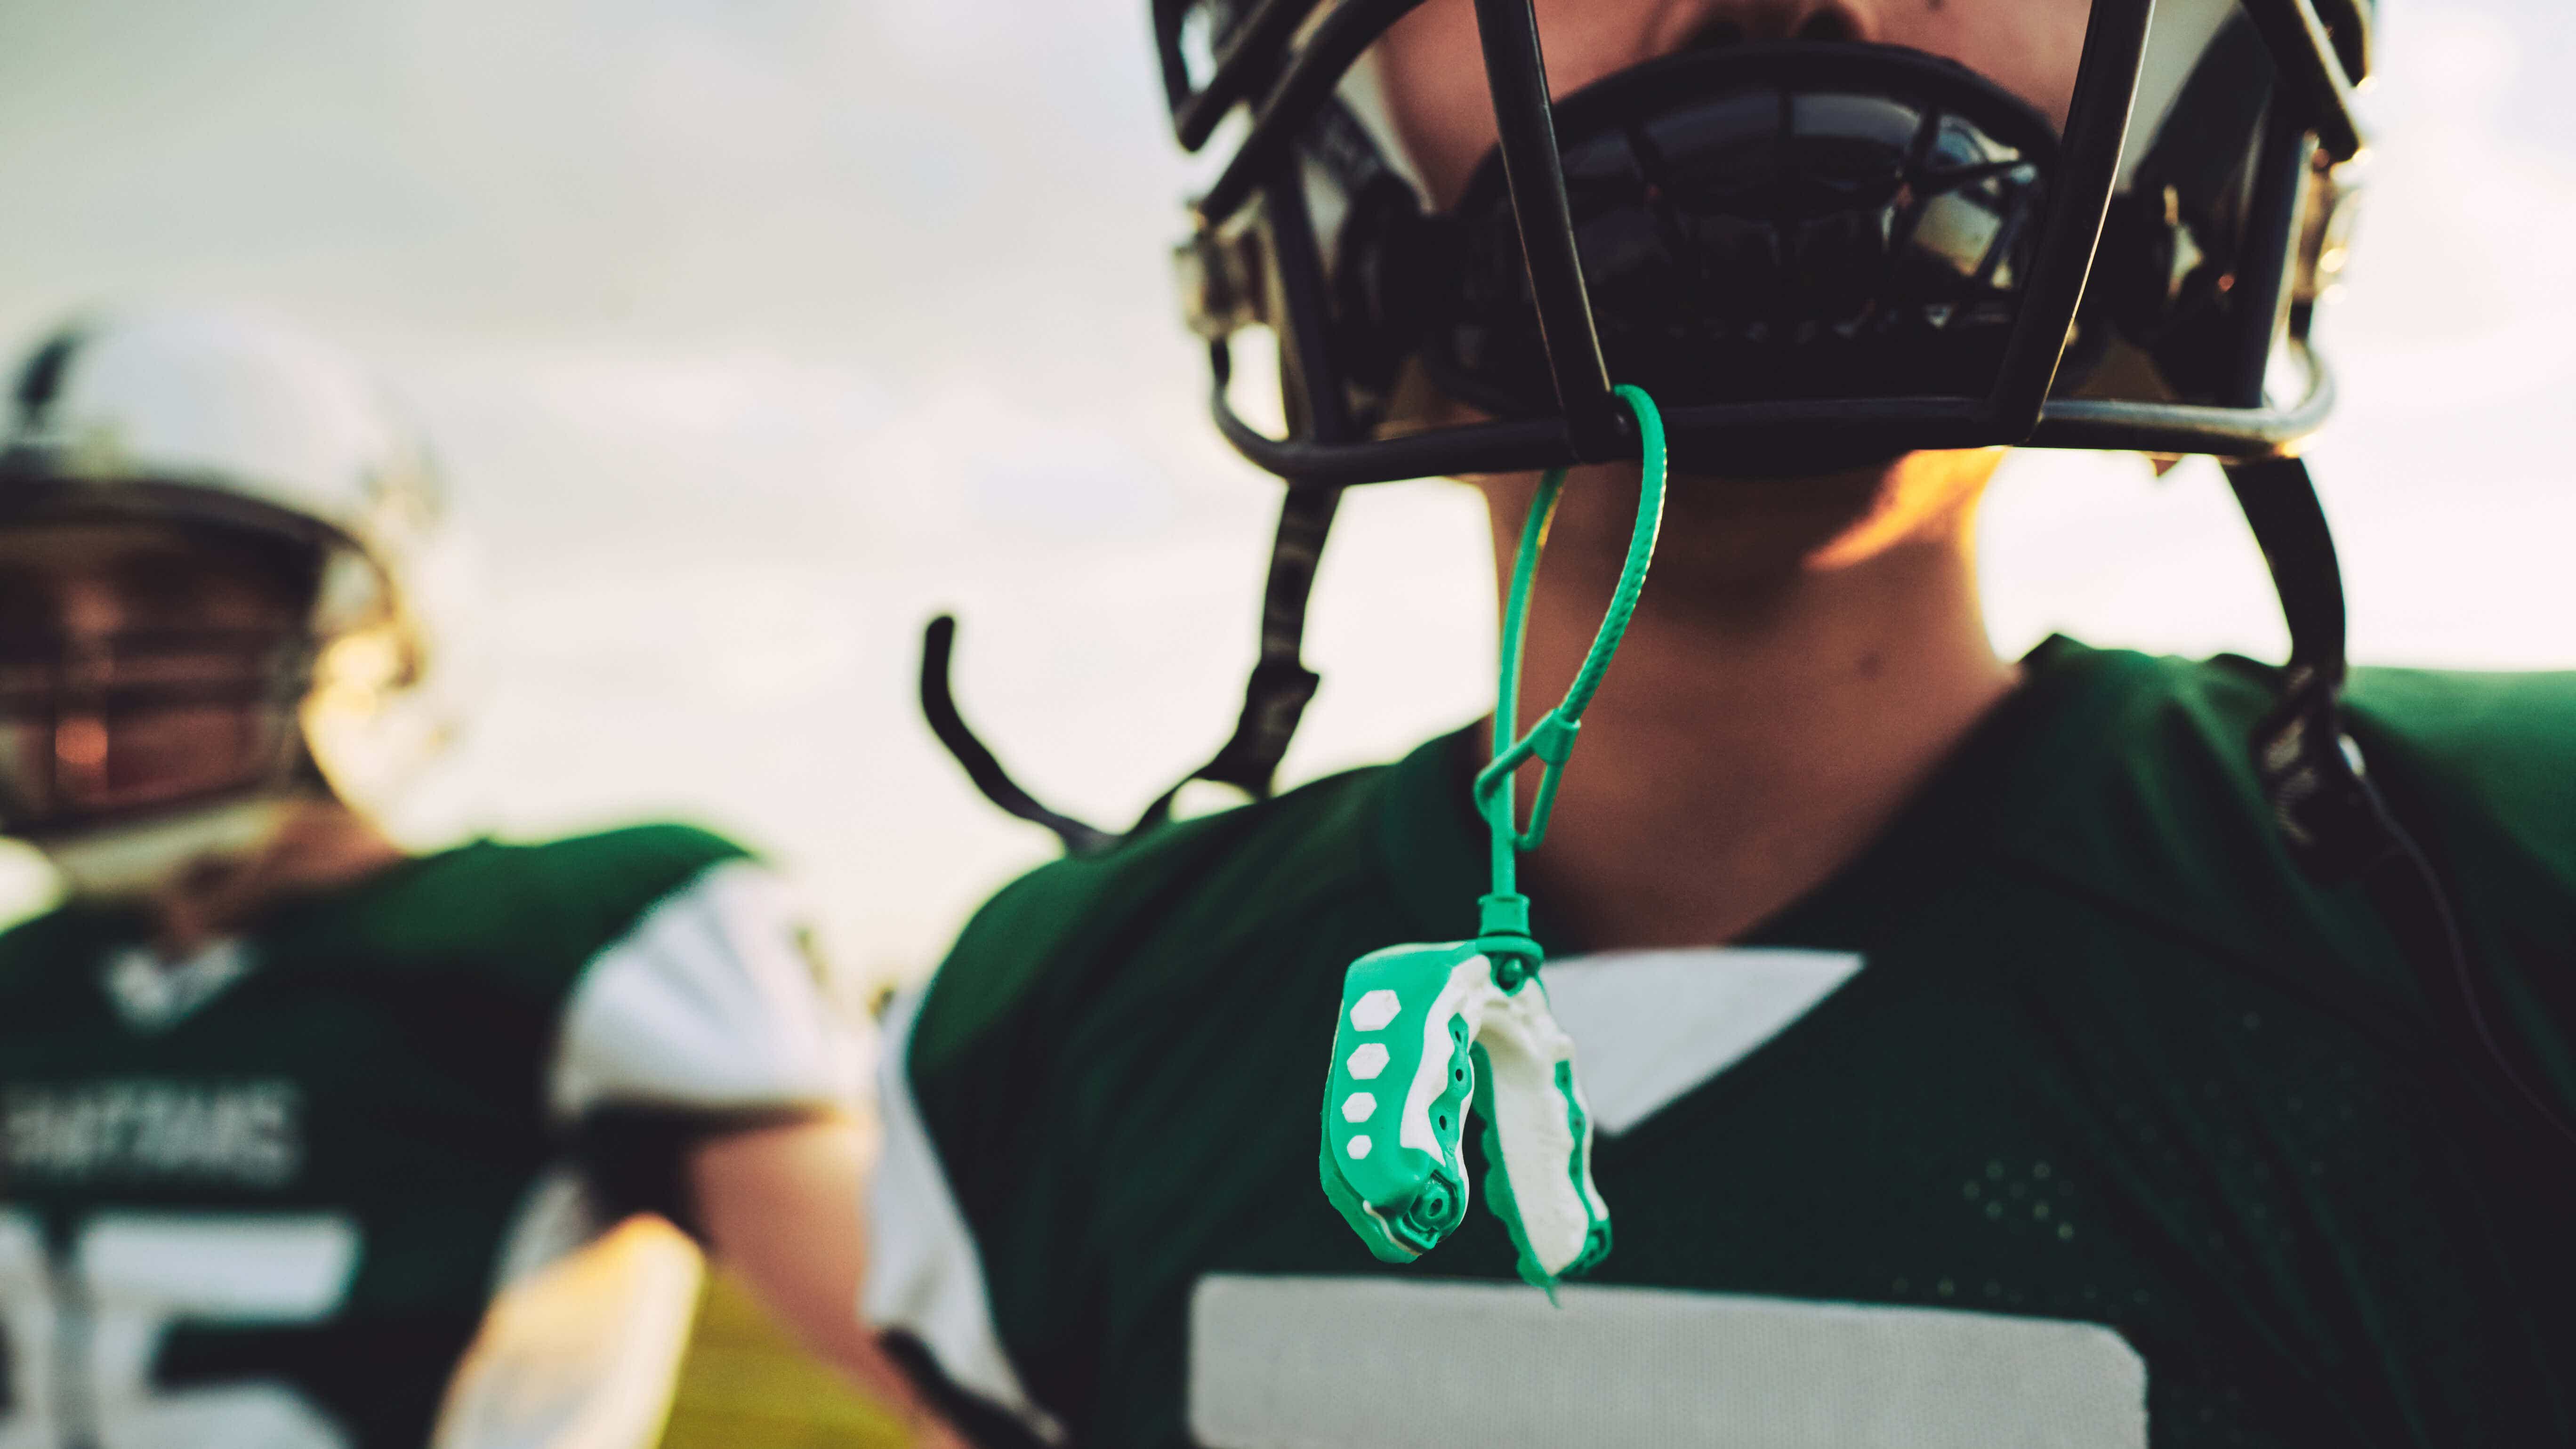 Football player using protective mouth guards